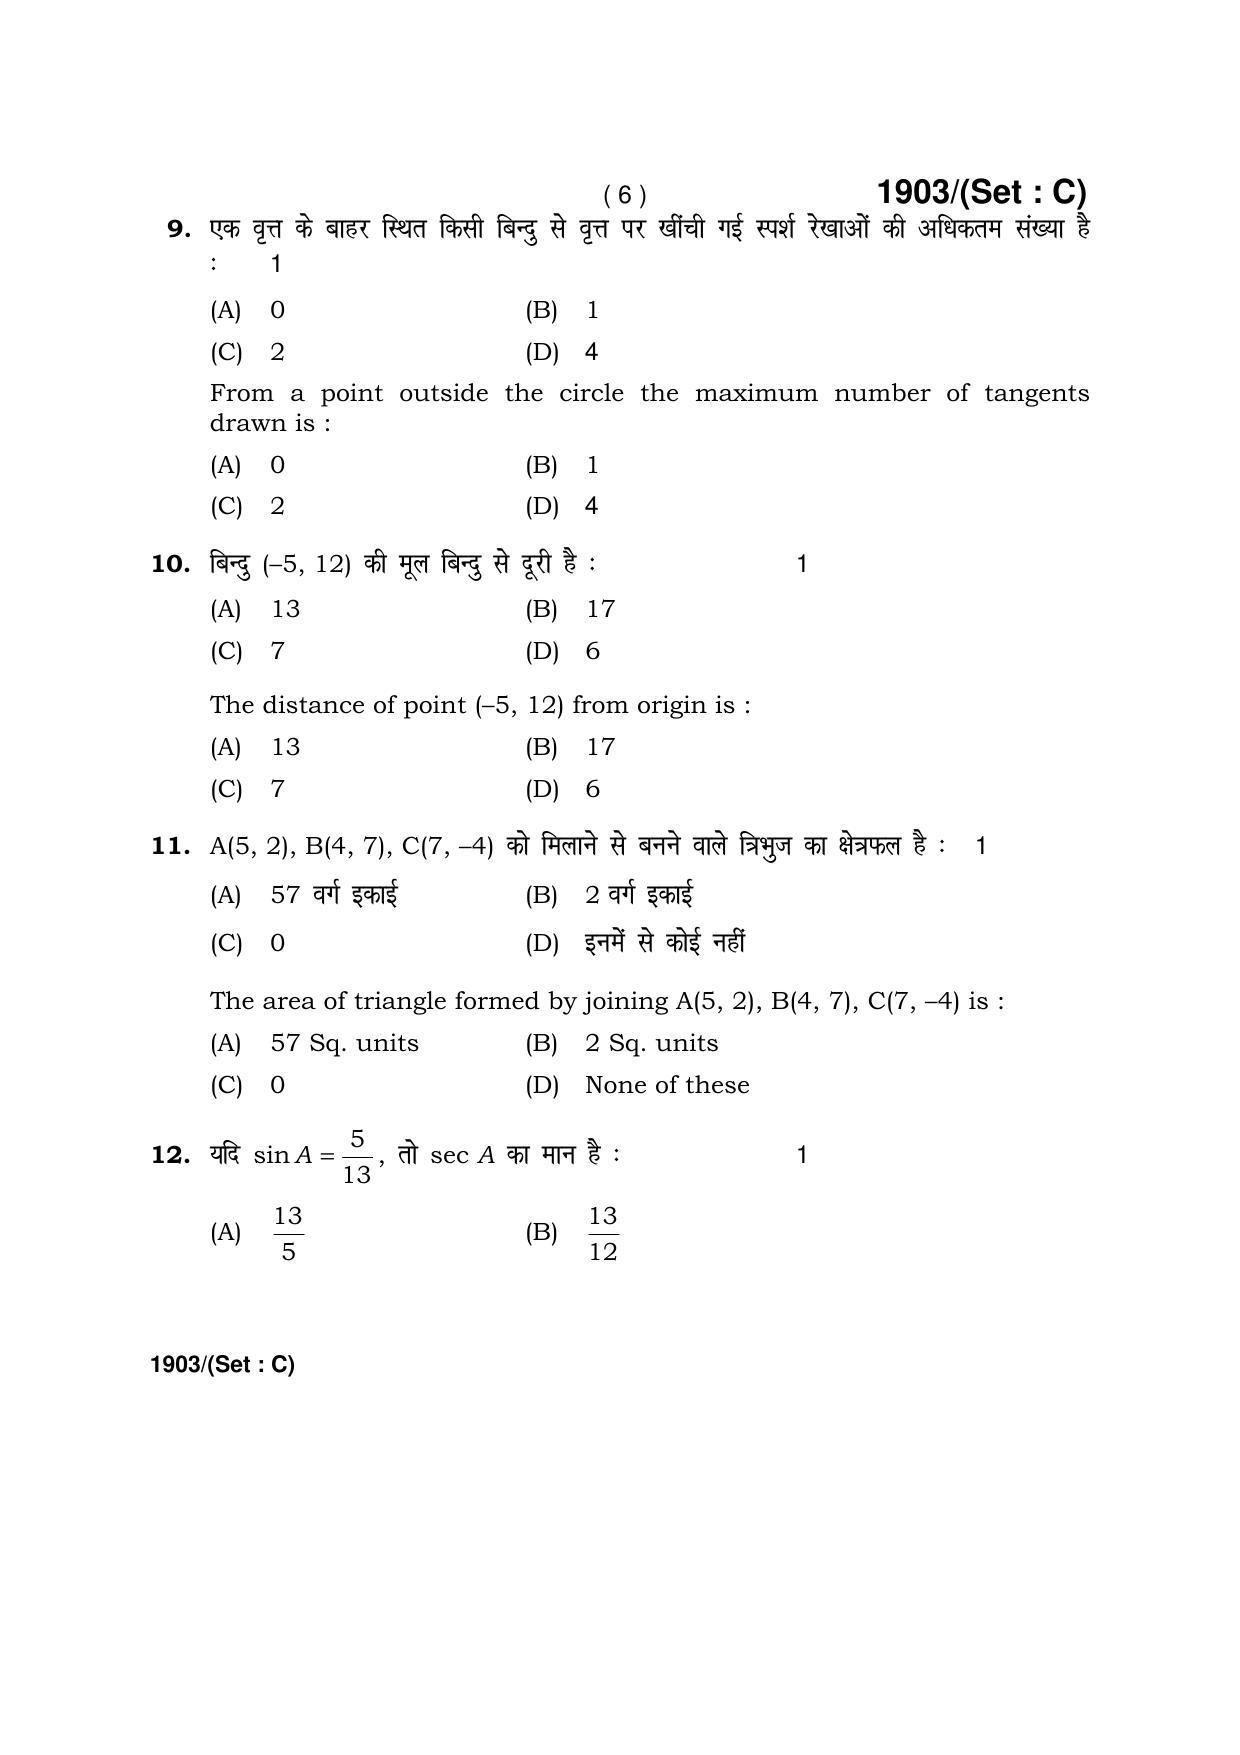 Haryana Board HBSE Class 10 Mathematics -C 2017 Question Paper - Page 6